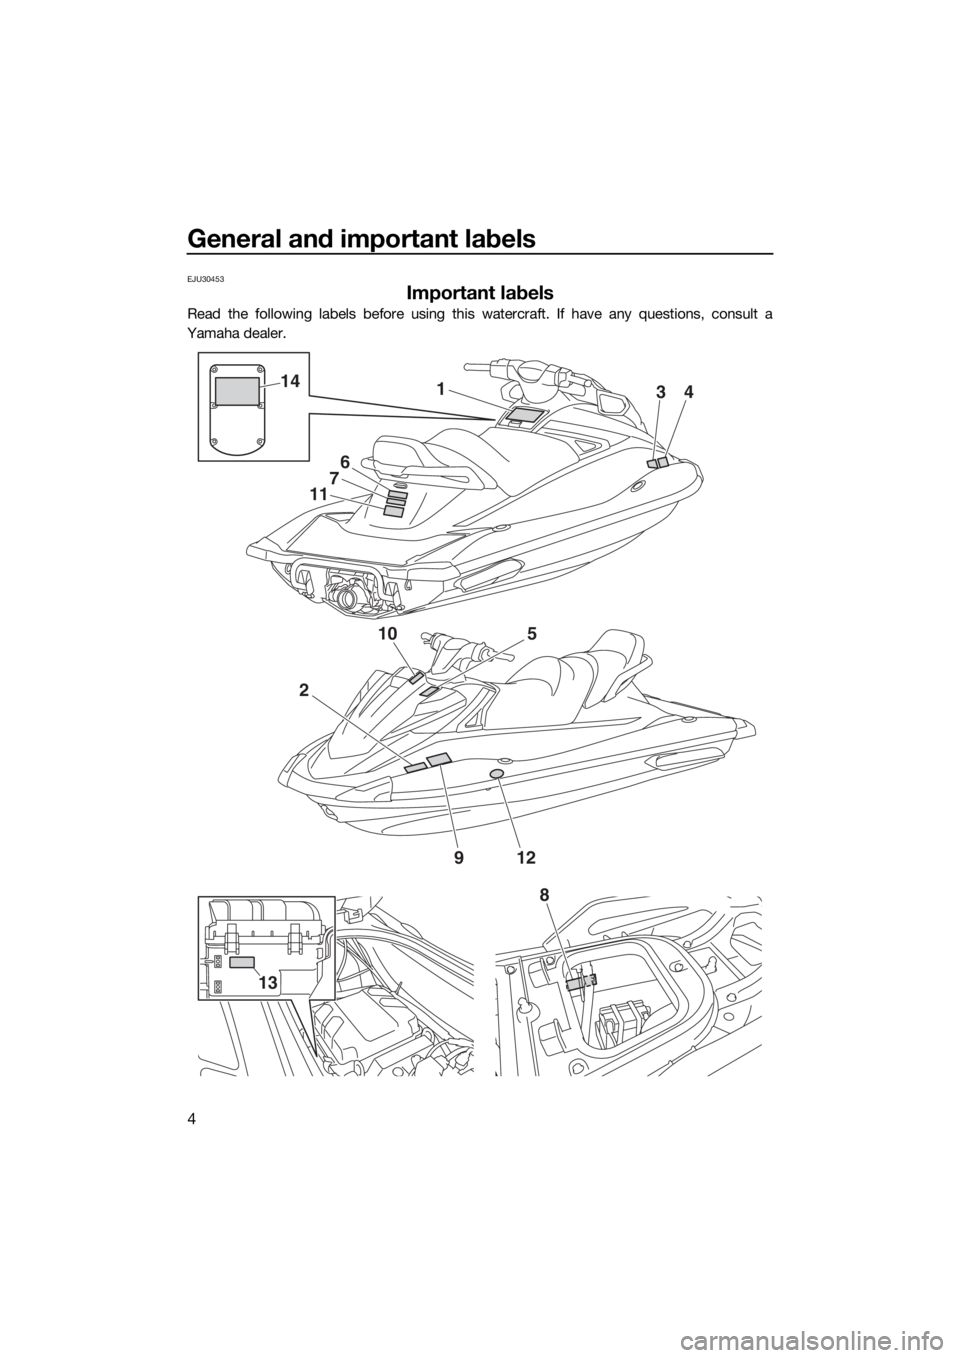 YAMAHA VX LIMITED 2017  Owners Manual General and important labels
4
EJU30453
Important labels
Read the following labels before using this watercraft. If have any questions, consult a
Yamaha dealer.
2
10
1
6
7
11
34
5
912
14
8
13
UF4G71E0